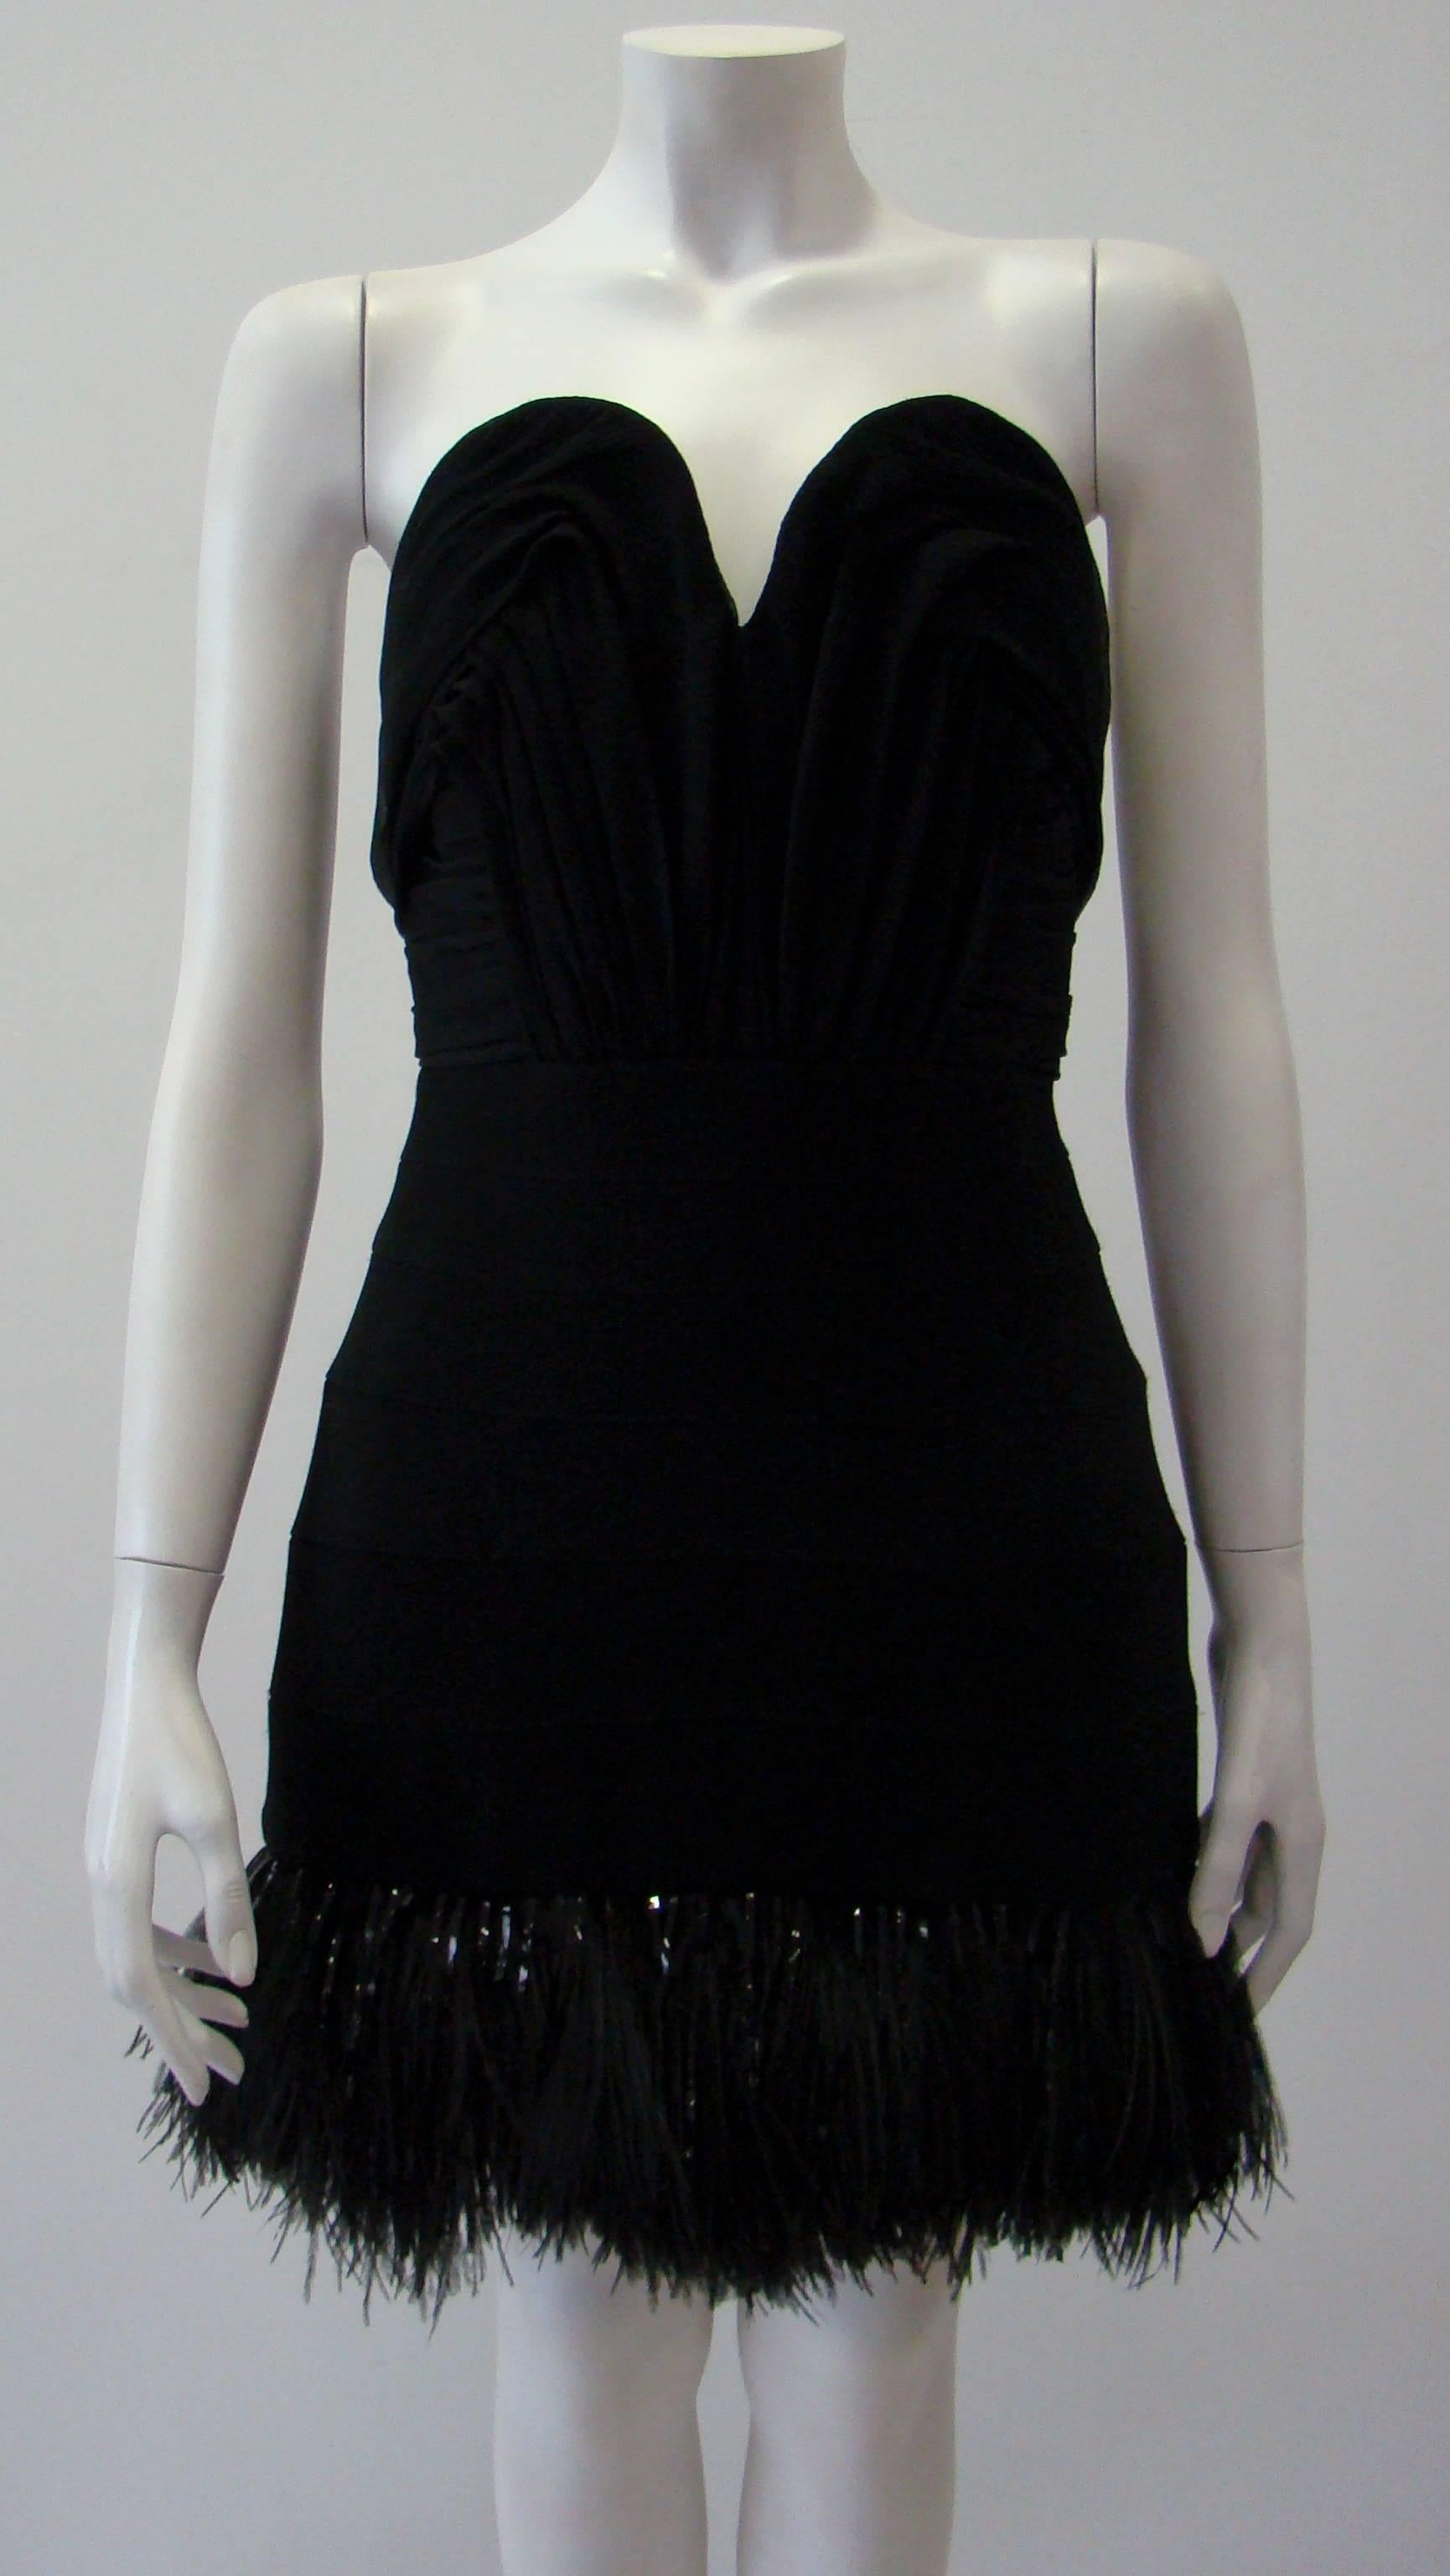 Stunning, Classy, Elegant And Timeless This Pierre Balmain Cocktail Dress Features A Deep Sweetheart Neckline, And The Front Bust Is Doubled To Really Shape And Hold Your Ladies In. With Feather Detail Around The End Line, And A Silver Visible Back